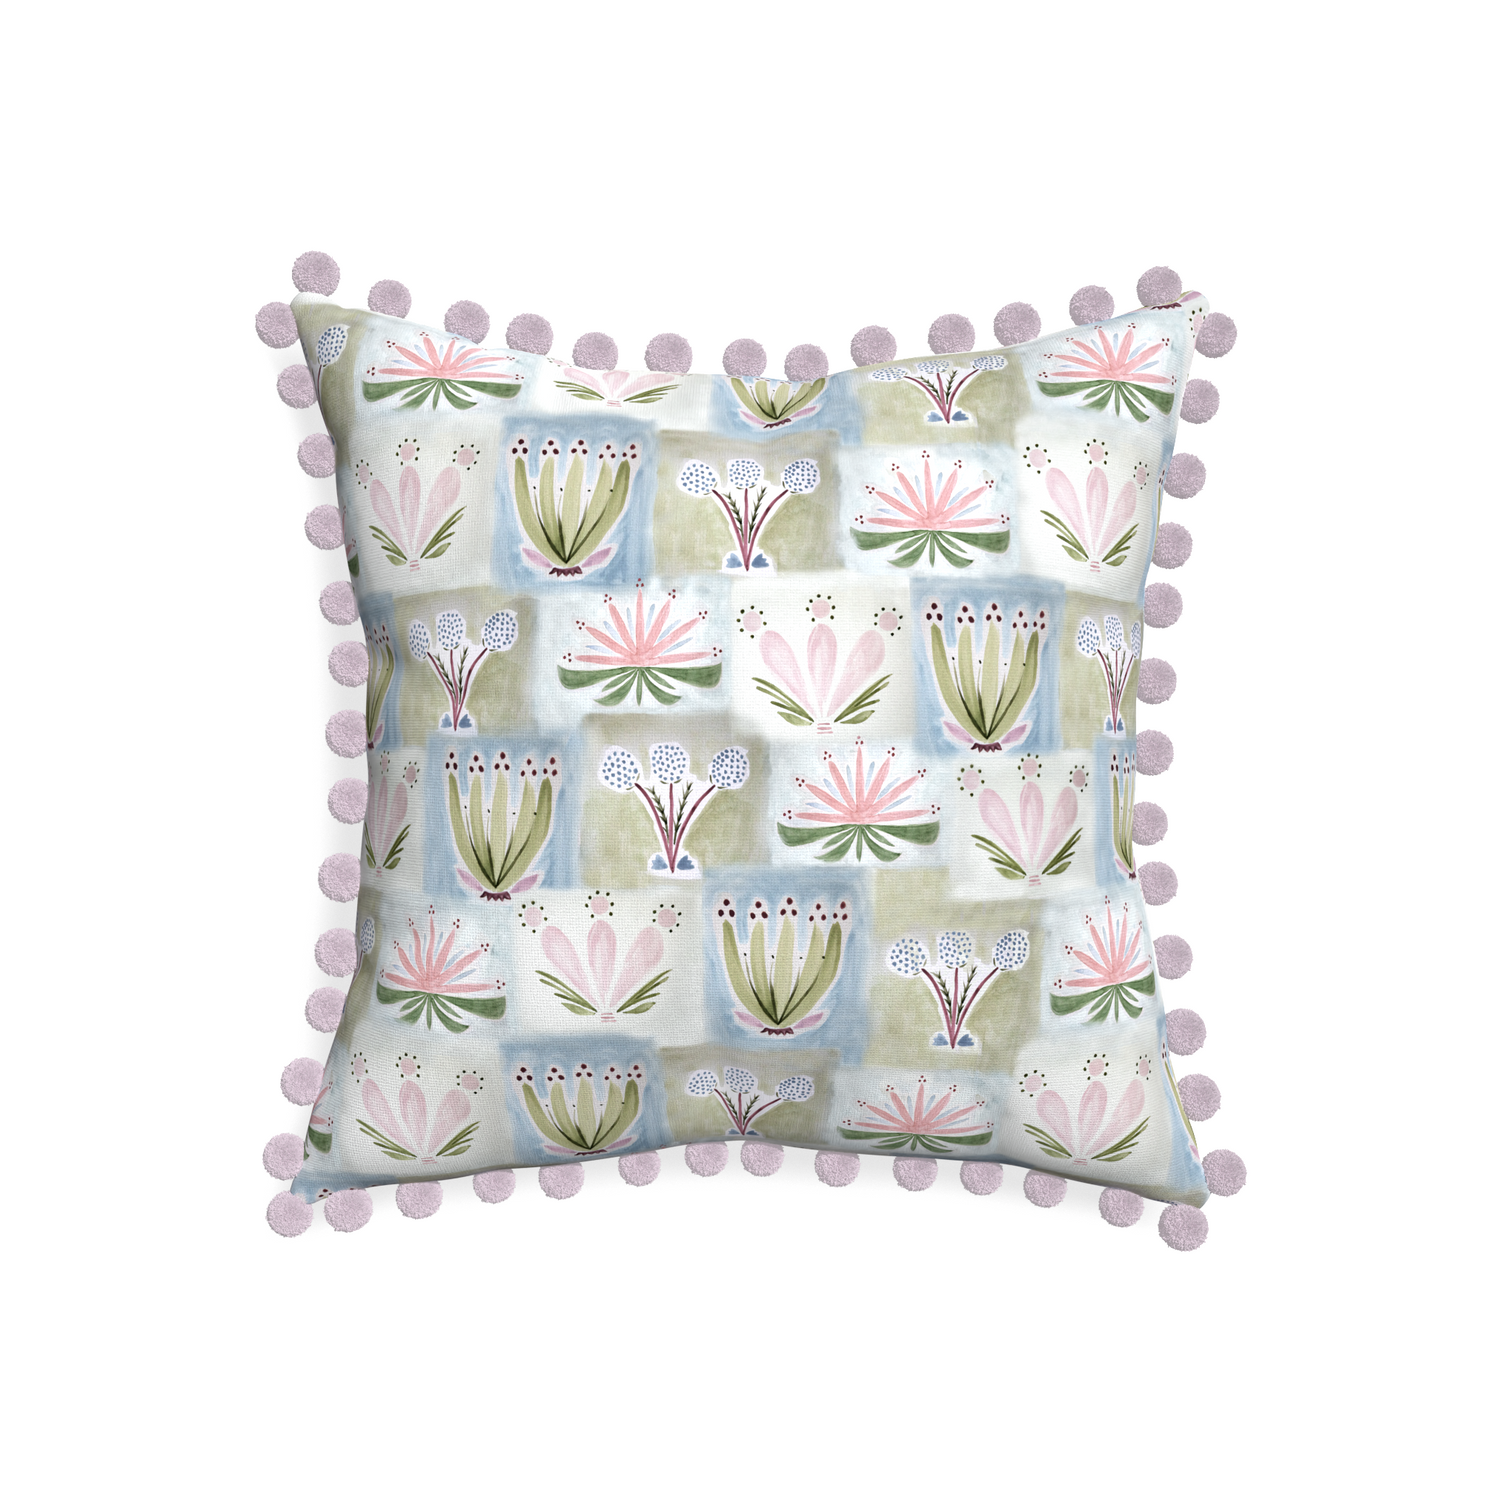 20-square harper custom hand-painted floralpillow with l on white background